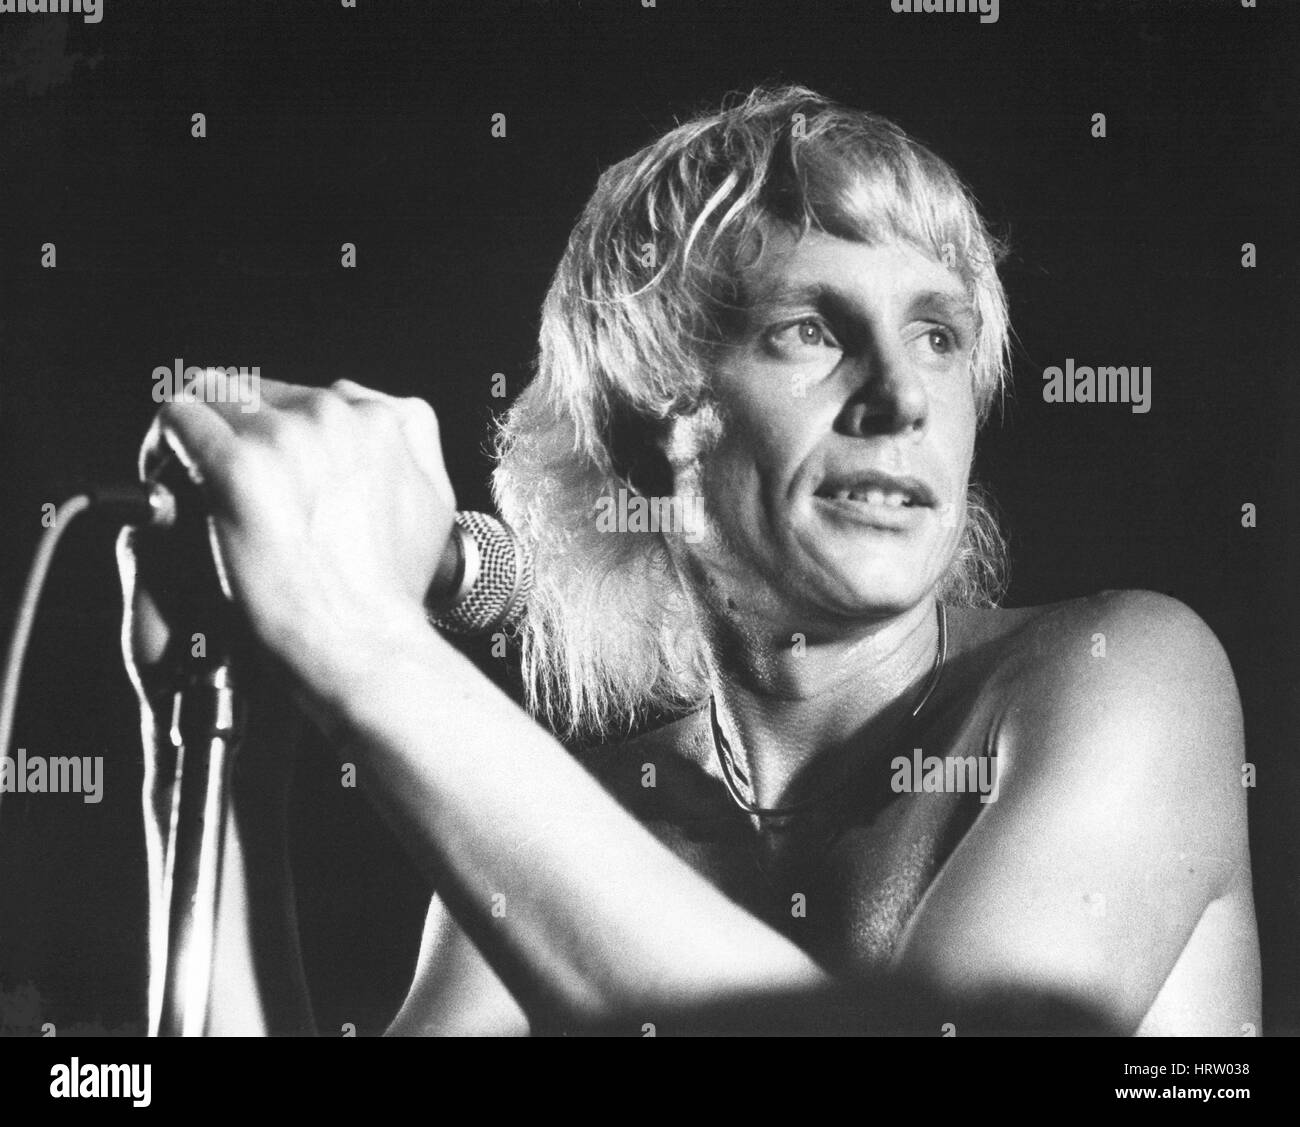 Andy Ellison, Lead singer of rock band Radio Stars, performa live on stage in London, England on July 21, 1978. He had previously been in the band Johns Children with Marc Bolan. Stock Photo